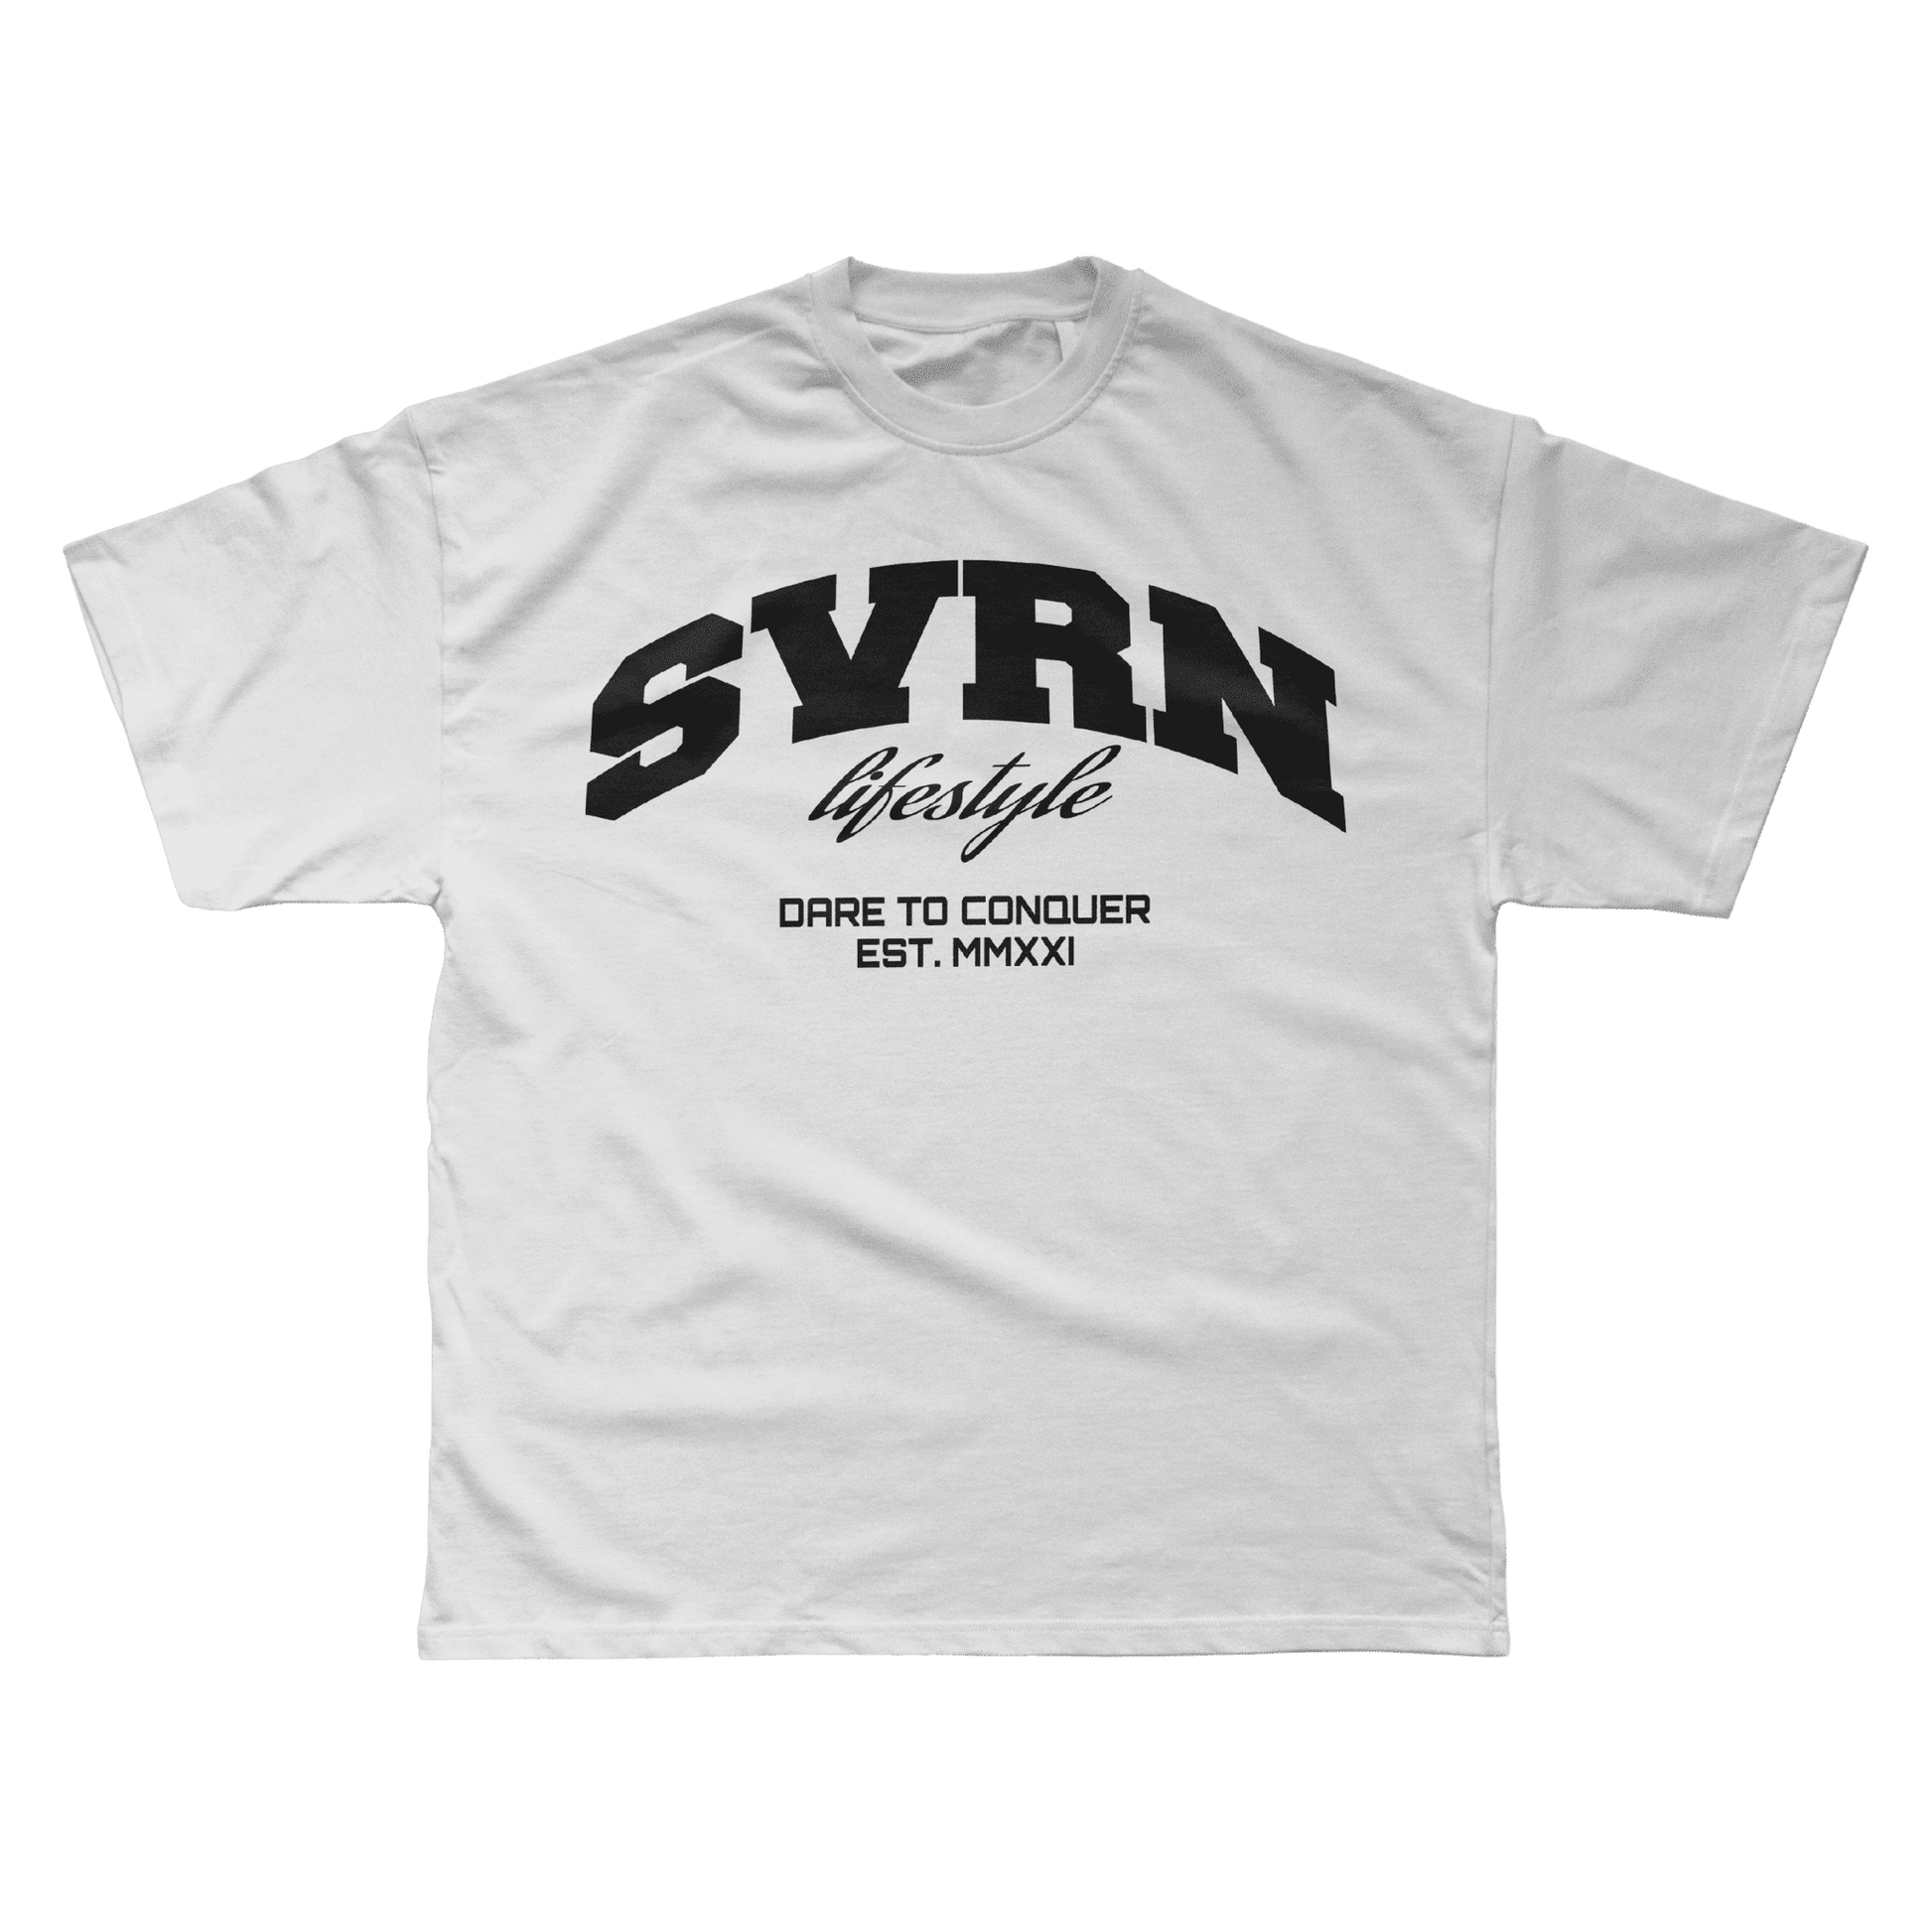 gym tees, gym tshirt, gym t shirts, cool gym shirt, gym clothing brand, sovereign, sovereign shirt, sovereign lifestyle, dare to conquer, white oversized tee